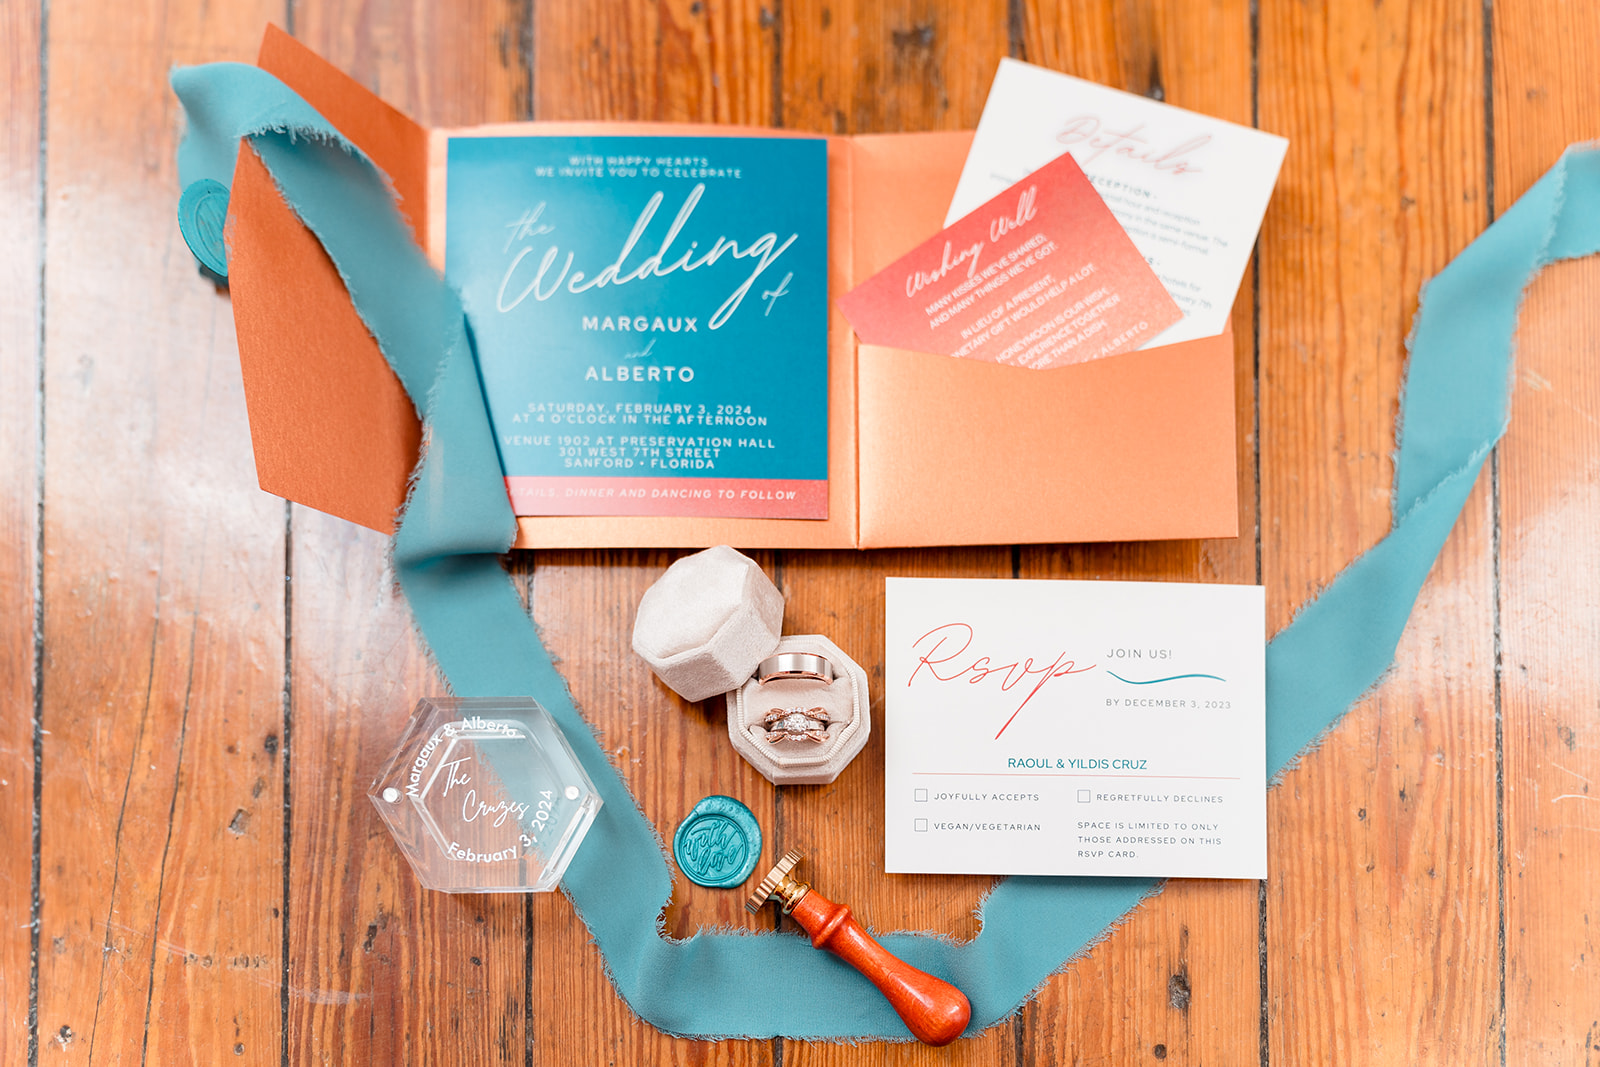 Close-up shot of wedding invitation and rings resting on a wooden table at Venue 1902.